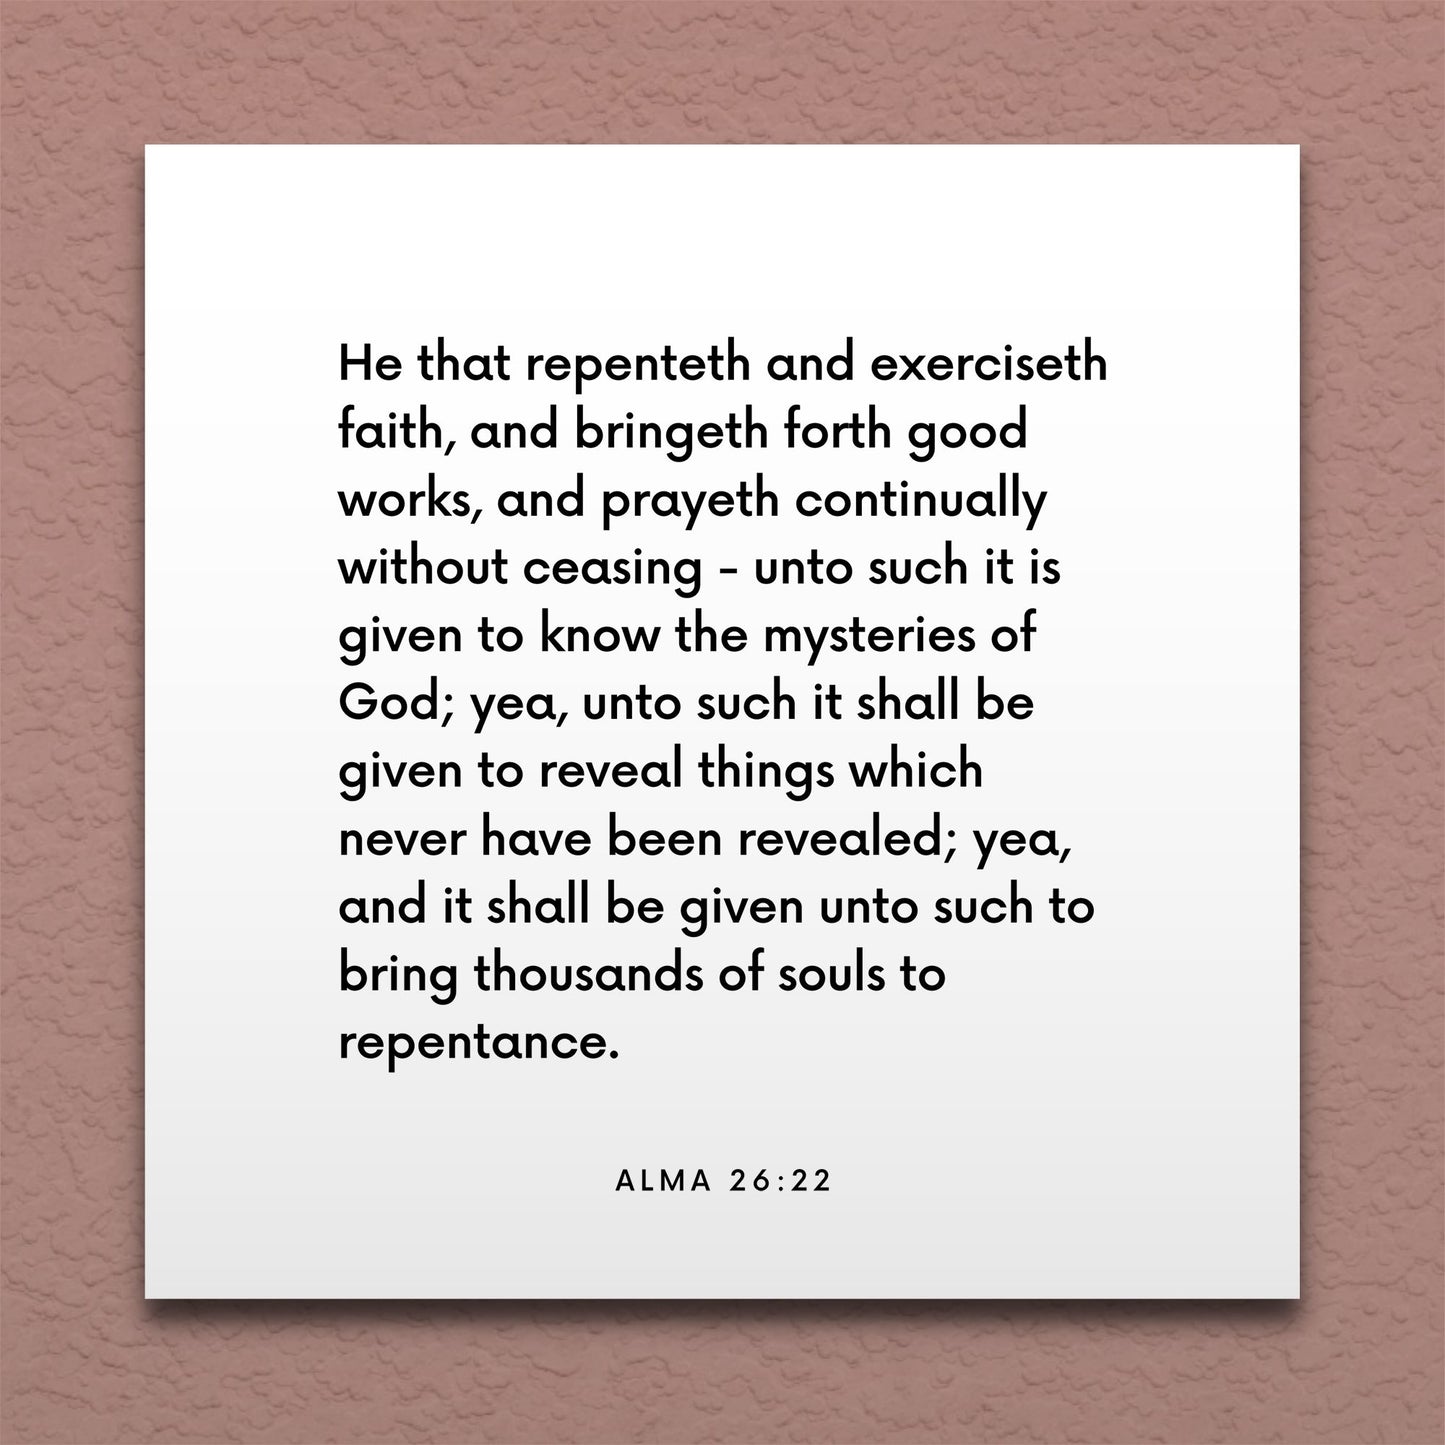 Wall-mounted scripture tile for Alma 26:22 - "He that repenteth and exerciseth faith"